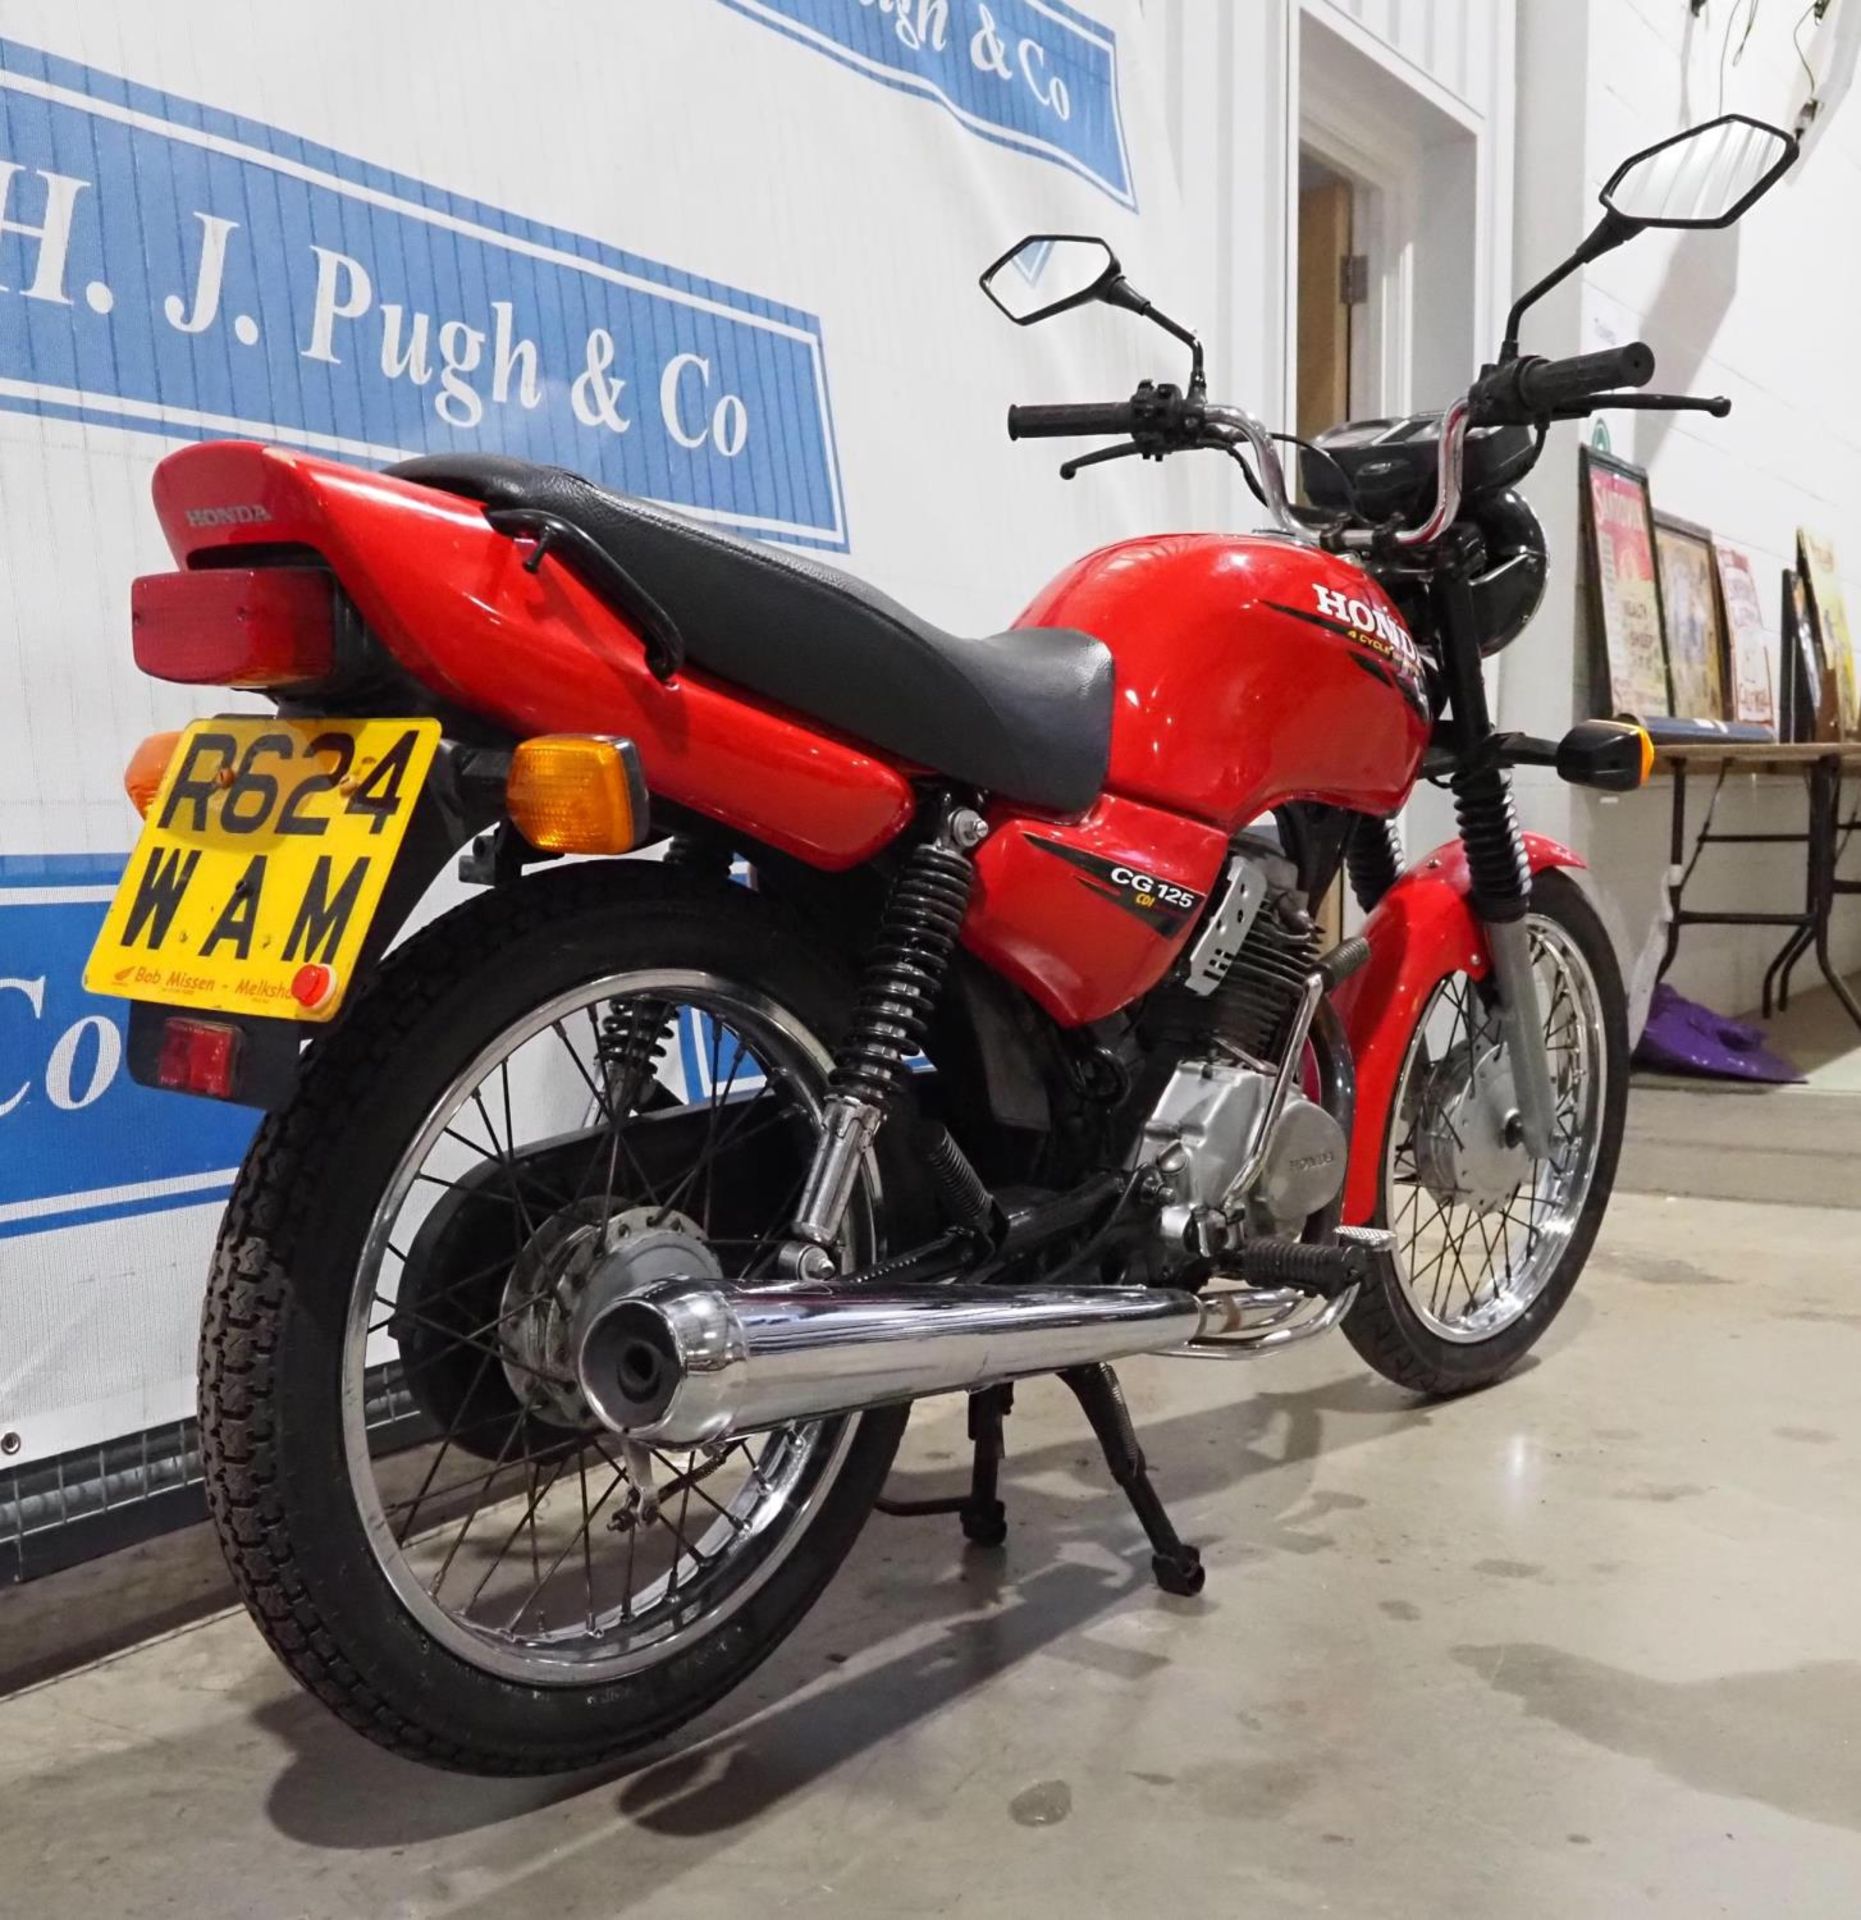 Honda CG125 motorcycle. 1998. 124cc. MOT until 27.03.2023. Starts and runs. Engine number does not - Image 5 of 6